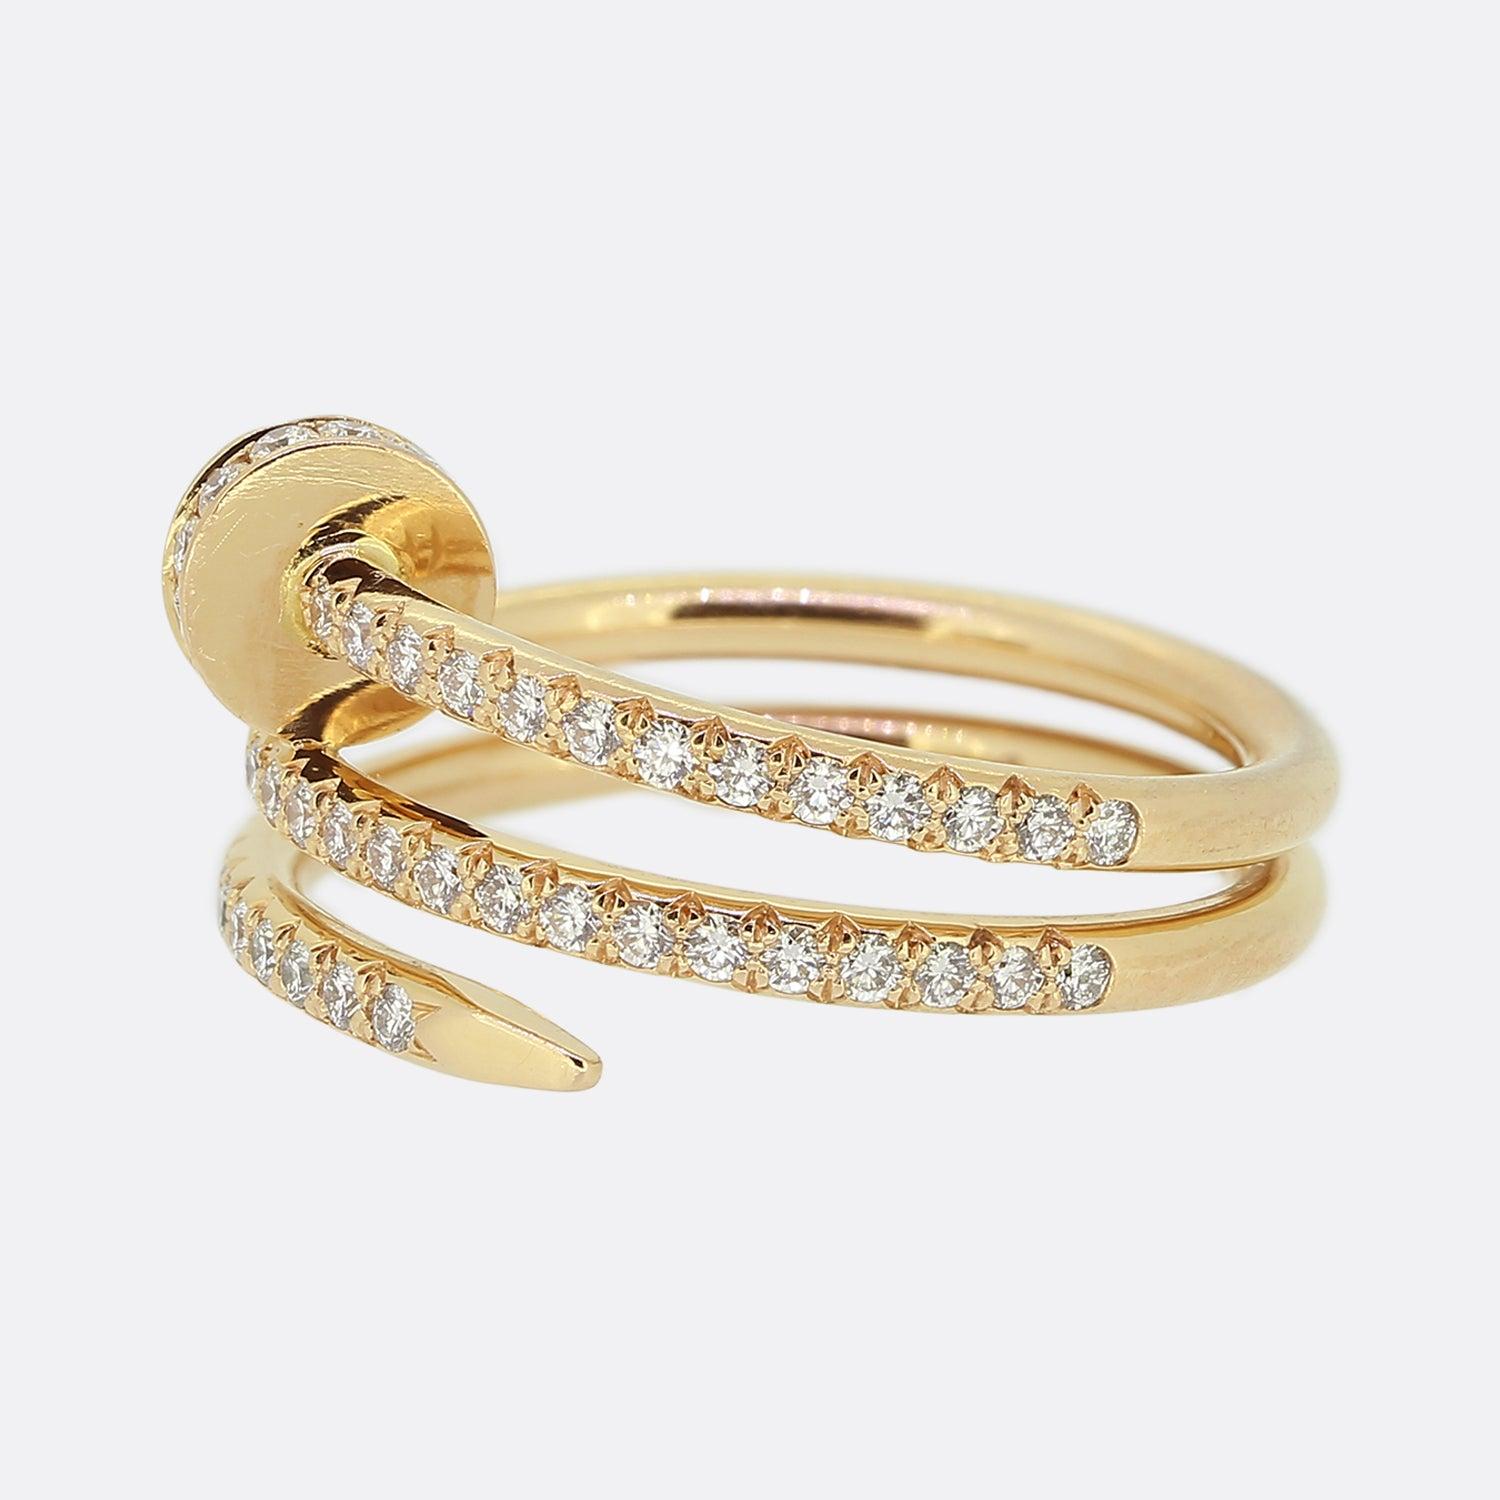 Here we have a fabulous diamond ring from the world renowned jewellery house of Cartier. This piece forms part of their 'Juste un Clou' collection with a triple wrap nail design which has been crafted from 18ct rose gold and pavé set at the front